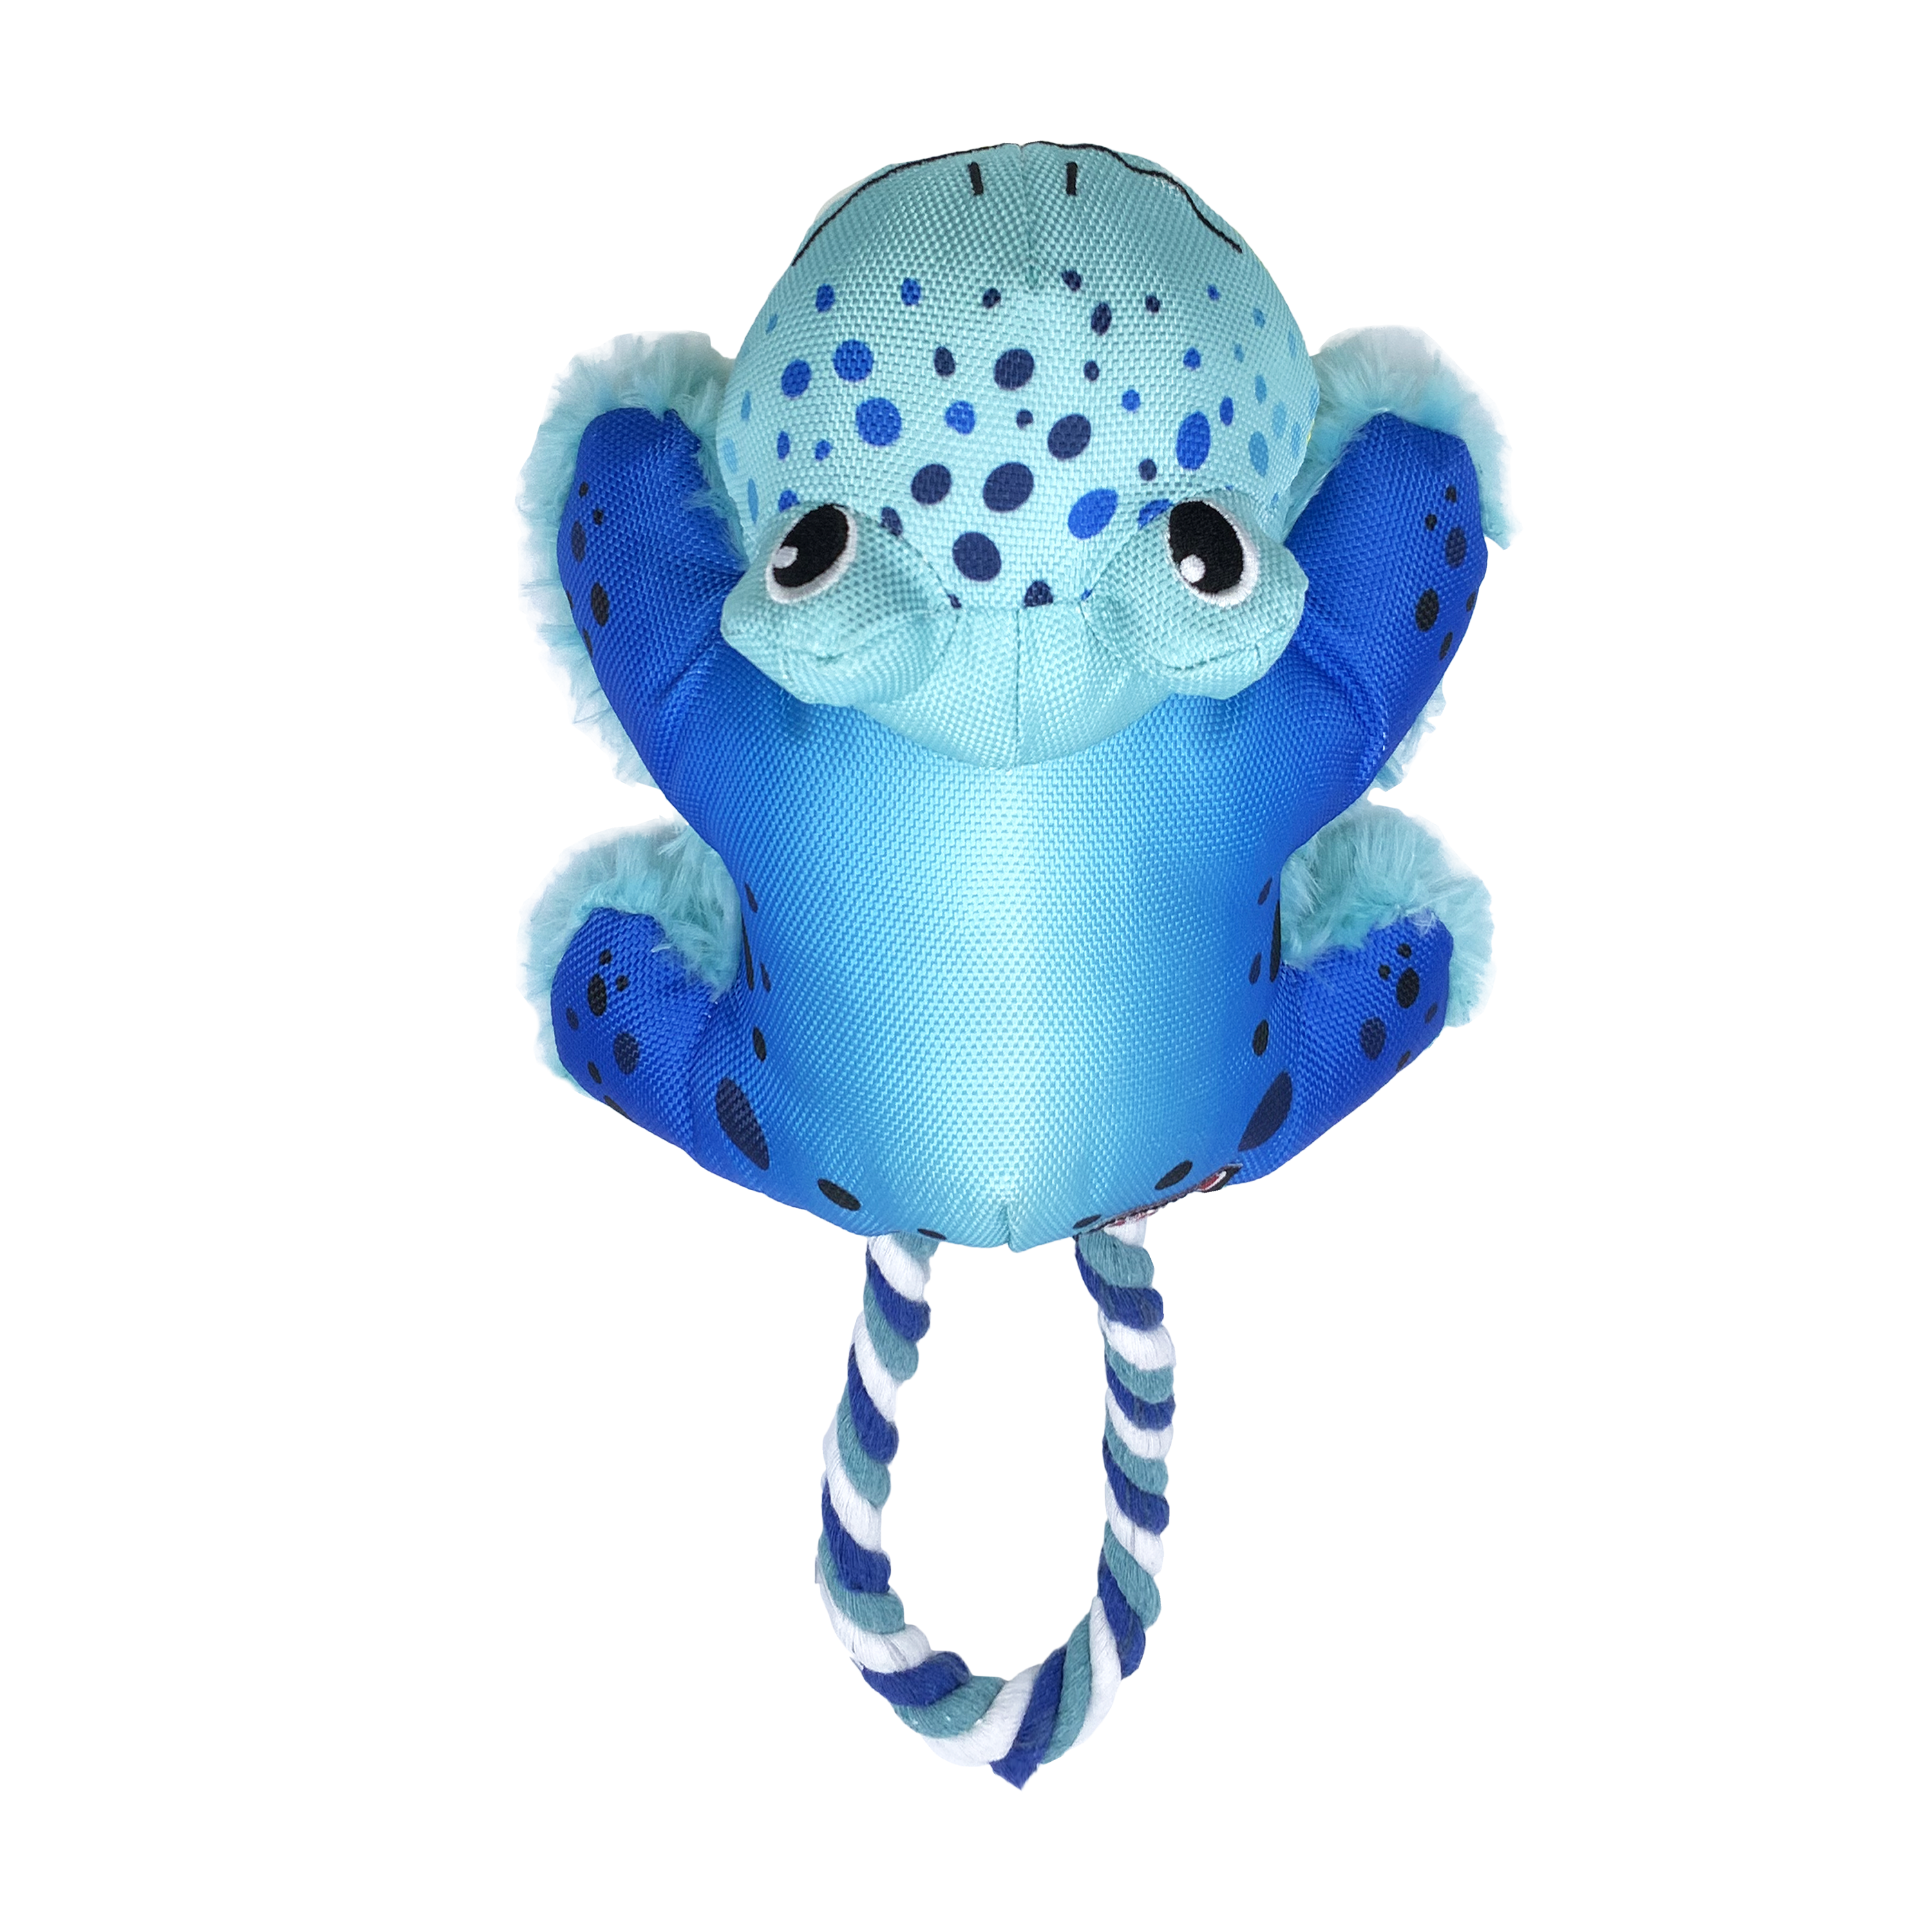 Cozie Tuggz Frog offpack product image